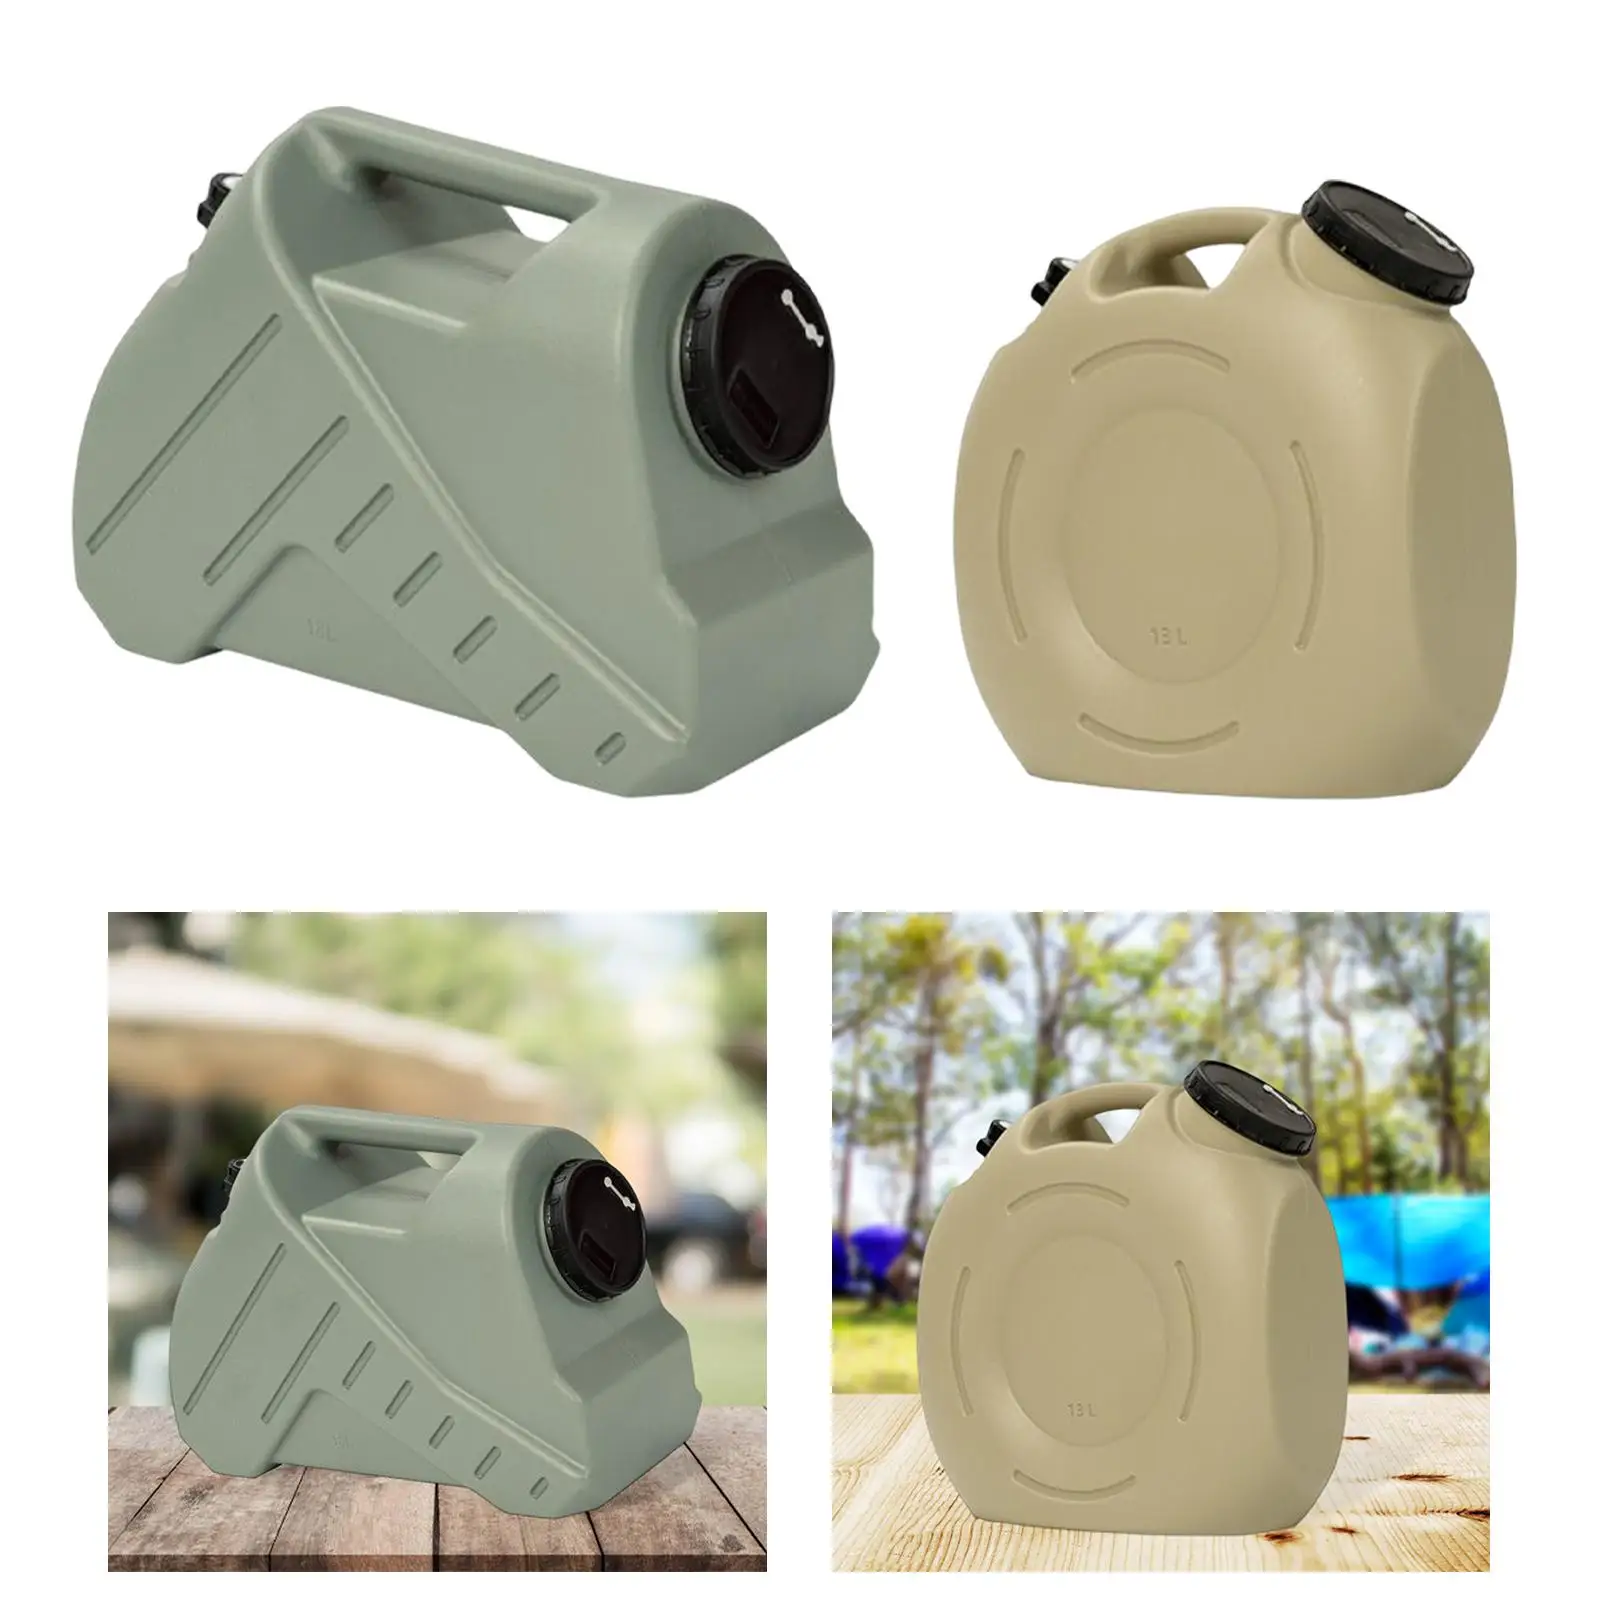 Water Storage Tank with Faucet Water Tank Container Water Jug Canister for Outside Activities Survival Backpacking Tourism BBQ